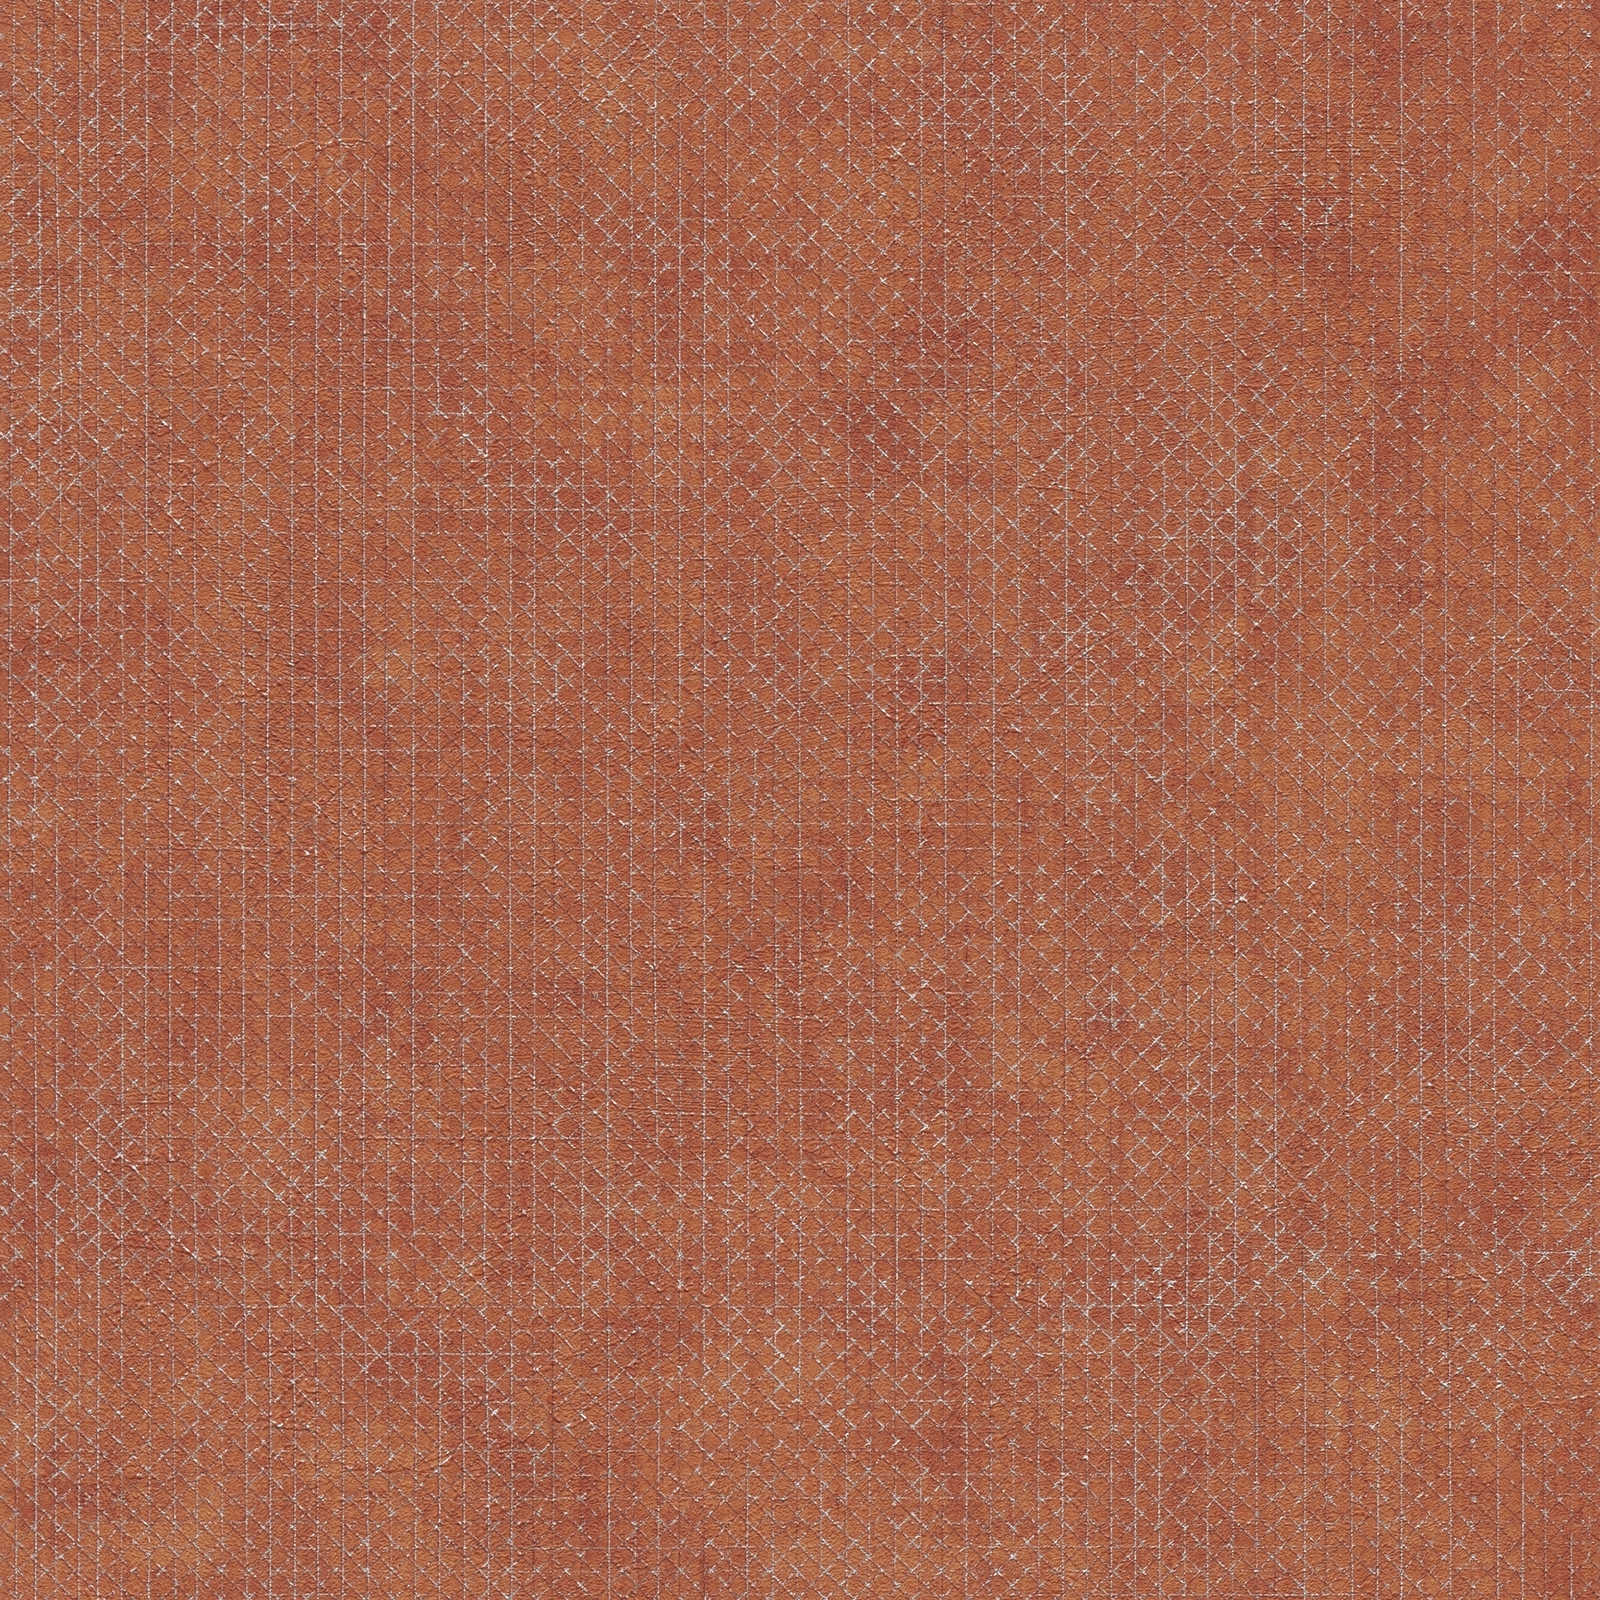 The Bos - Mottled Metallic Lines bold wallpaper AS Creation Roll Orange  388266